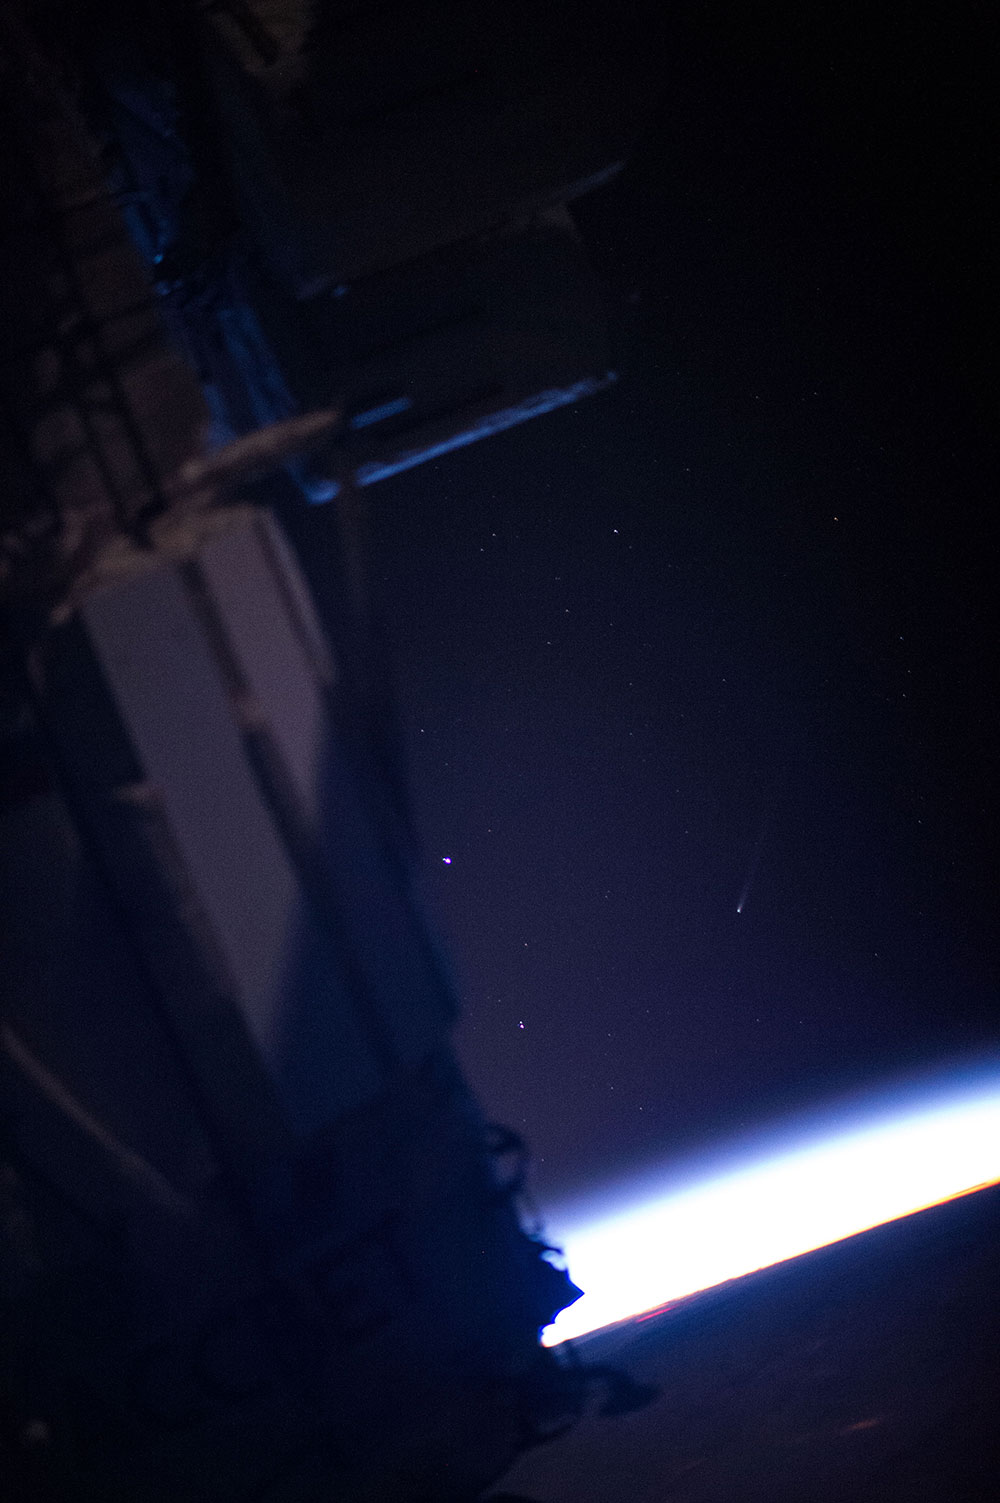 Comet ISON photographed by the crew aboard the International Space Station.